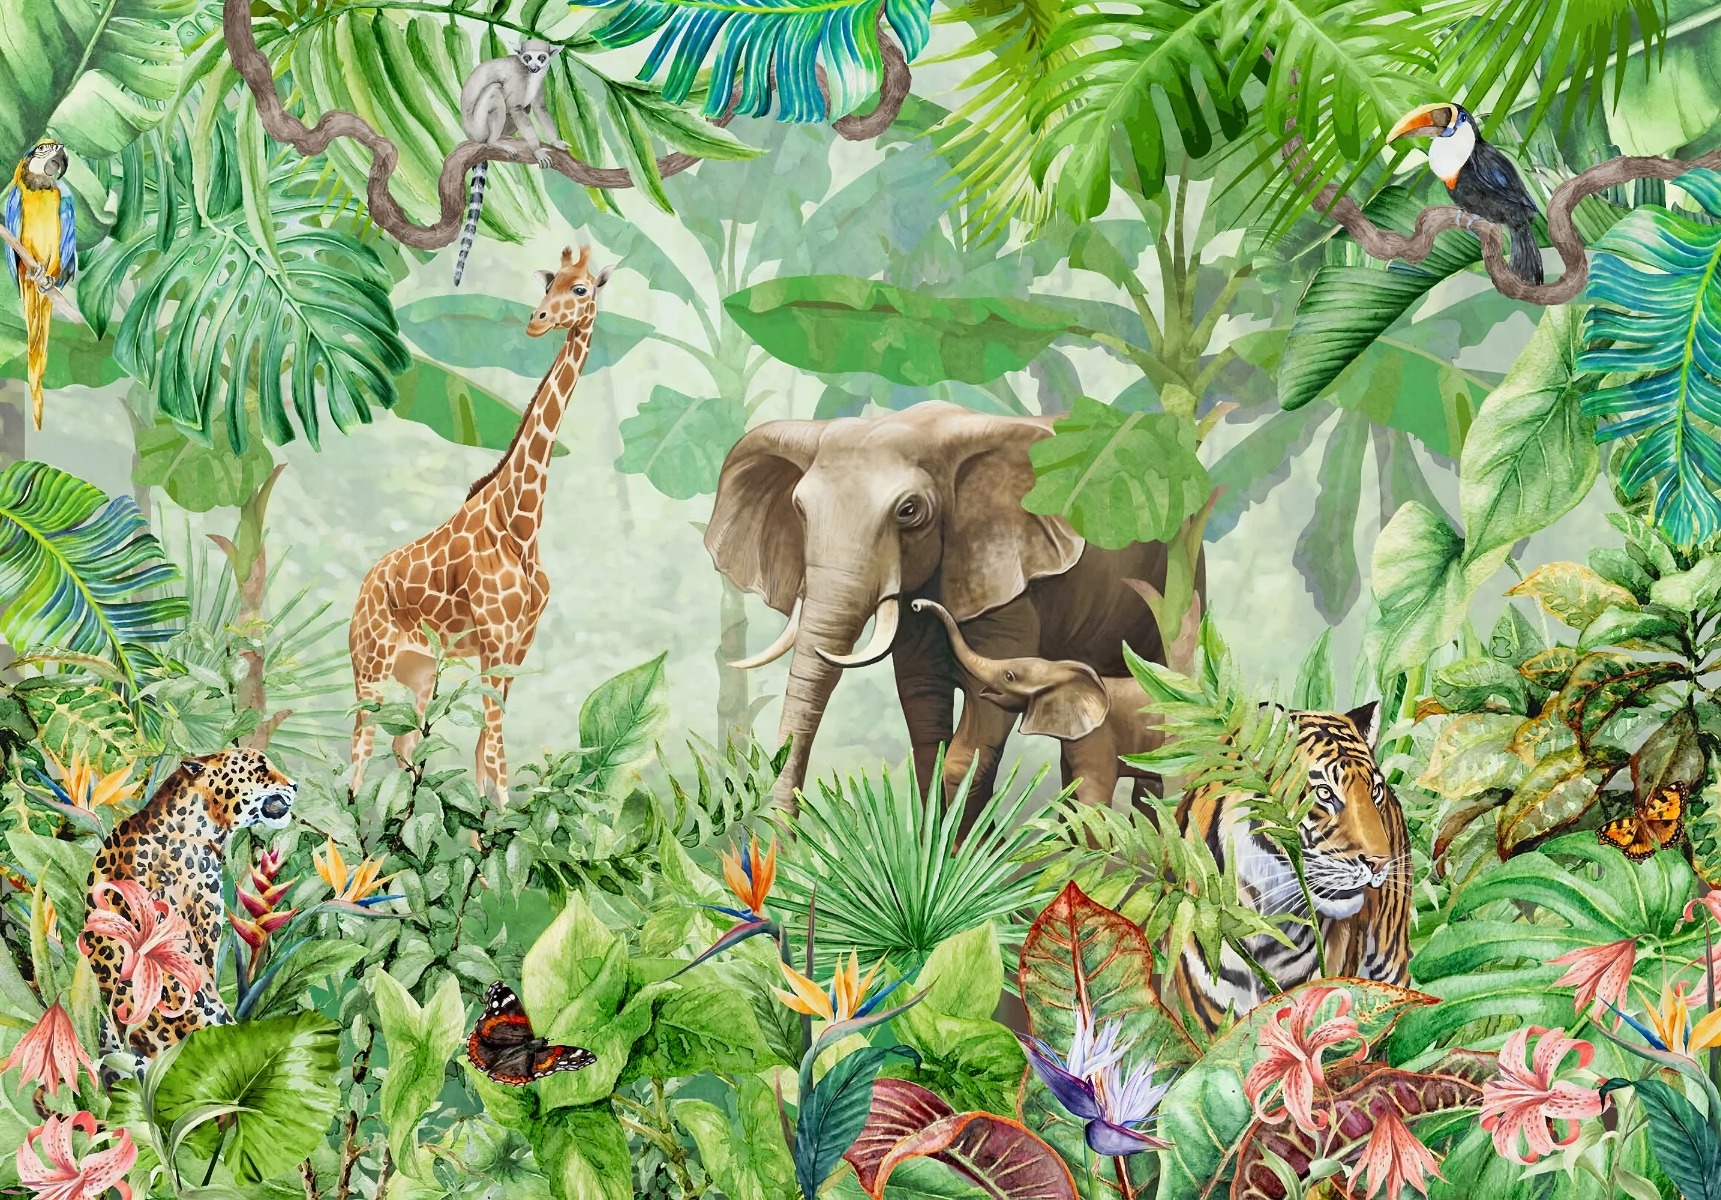 Envouge 3D Wallpaper Jungle Animals Self Adhesive for Kids Room Living  Room Bedroom Study Room Cute Wallpapers for Home  Multi Color  3ft X  2ft  Amazonin Home Improvement